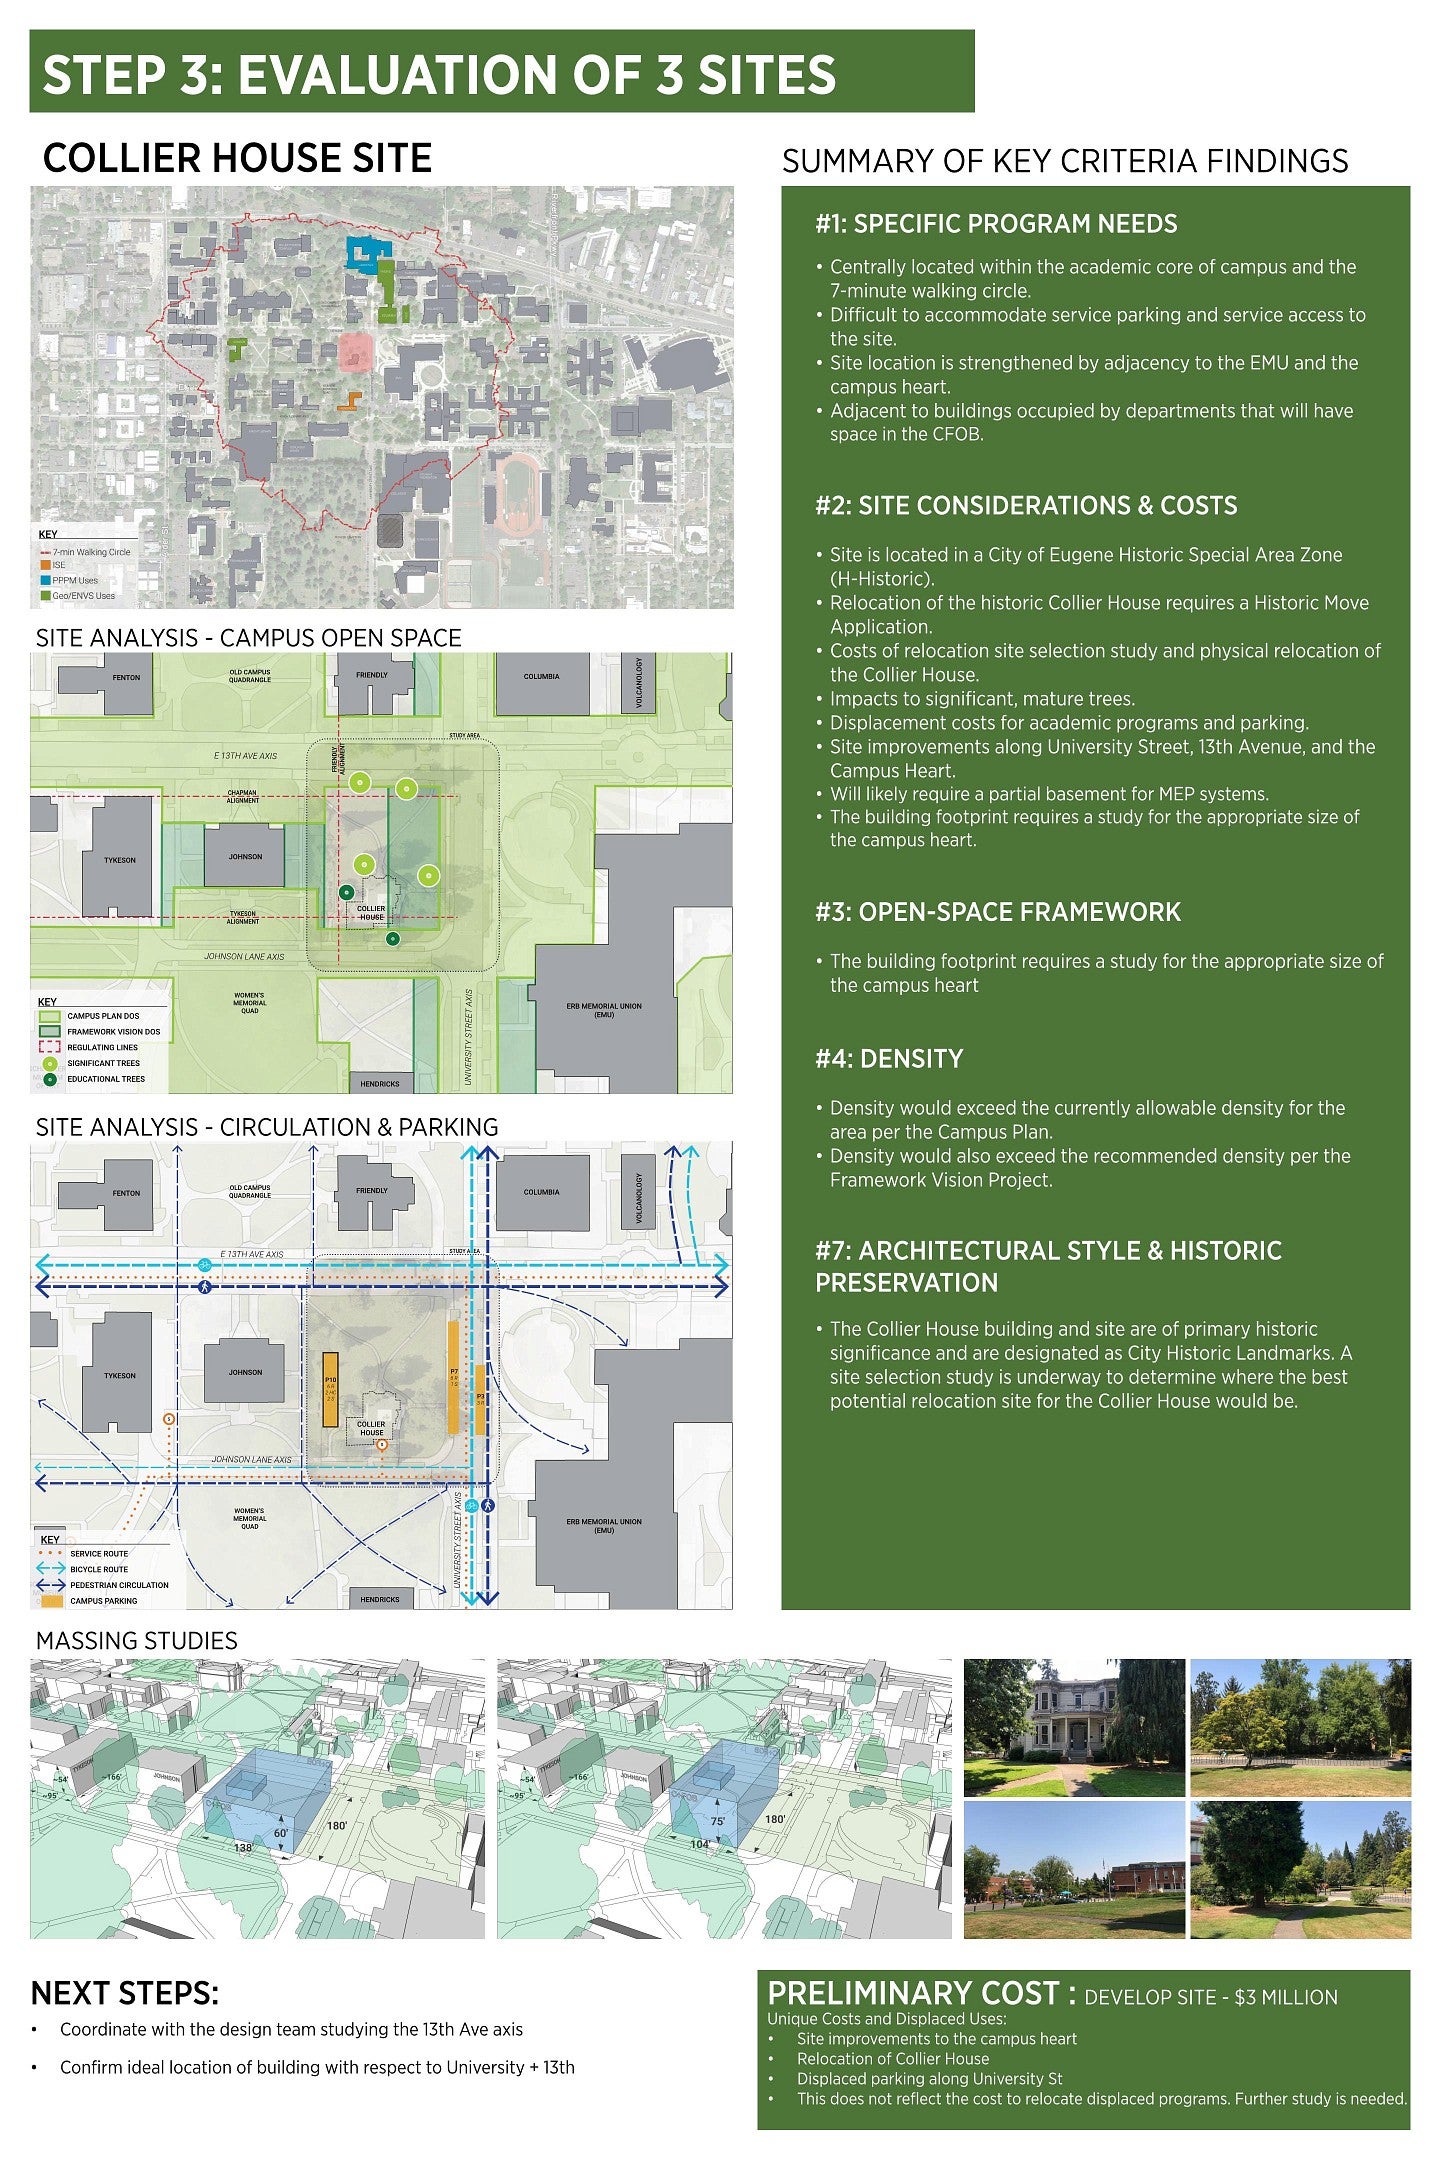 Collier House Site Analysis